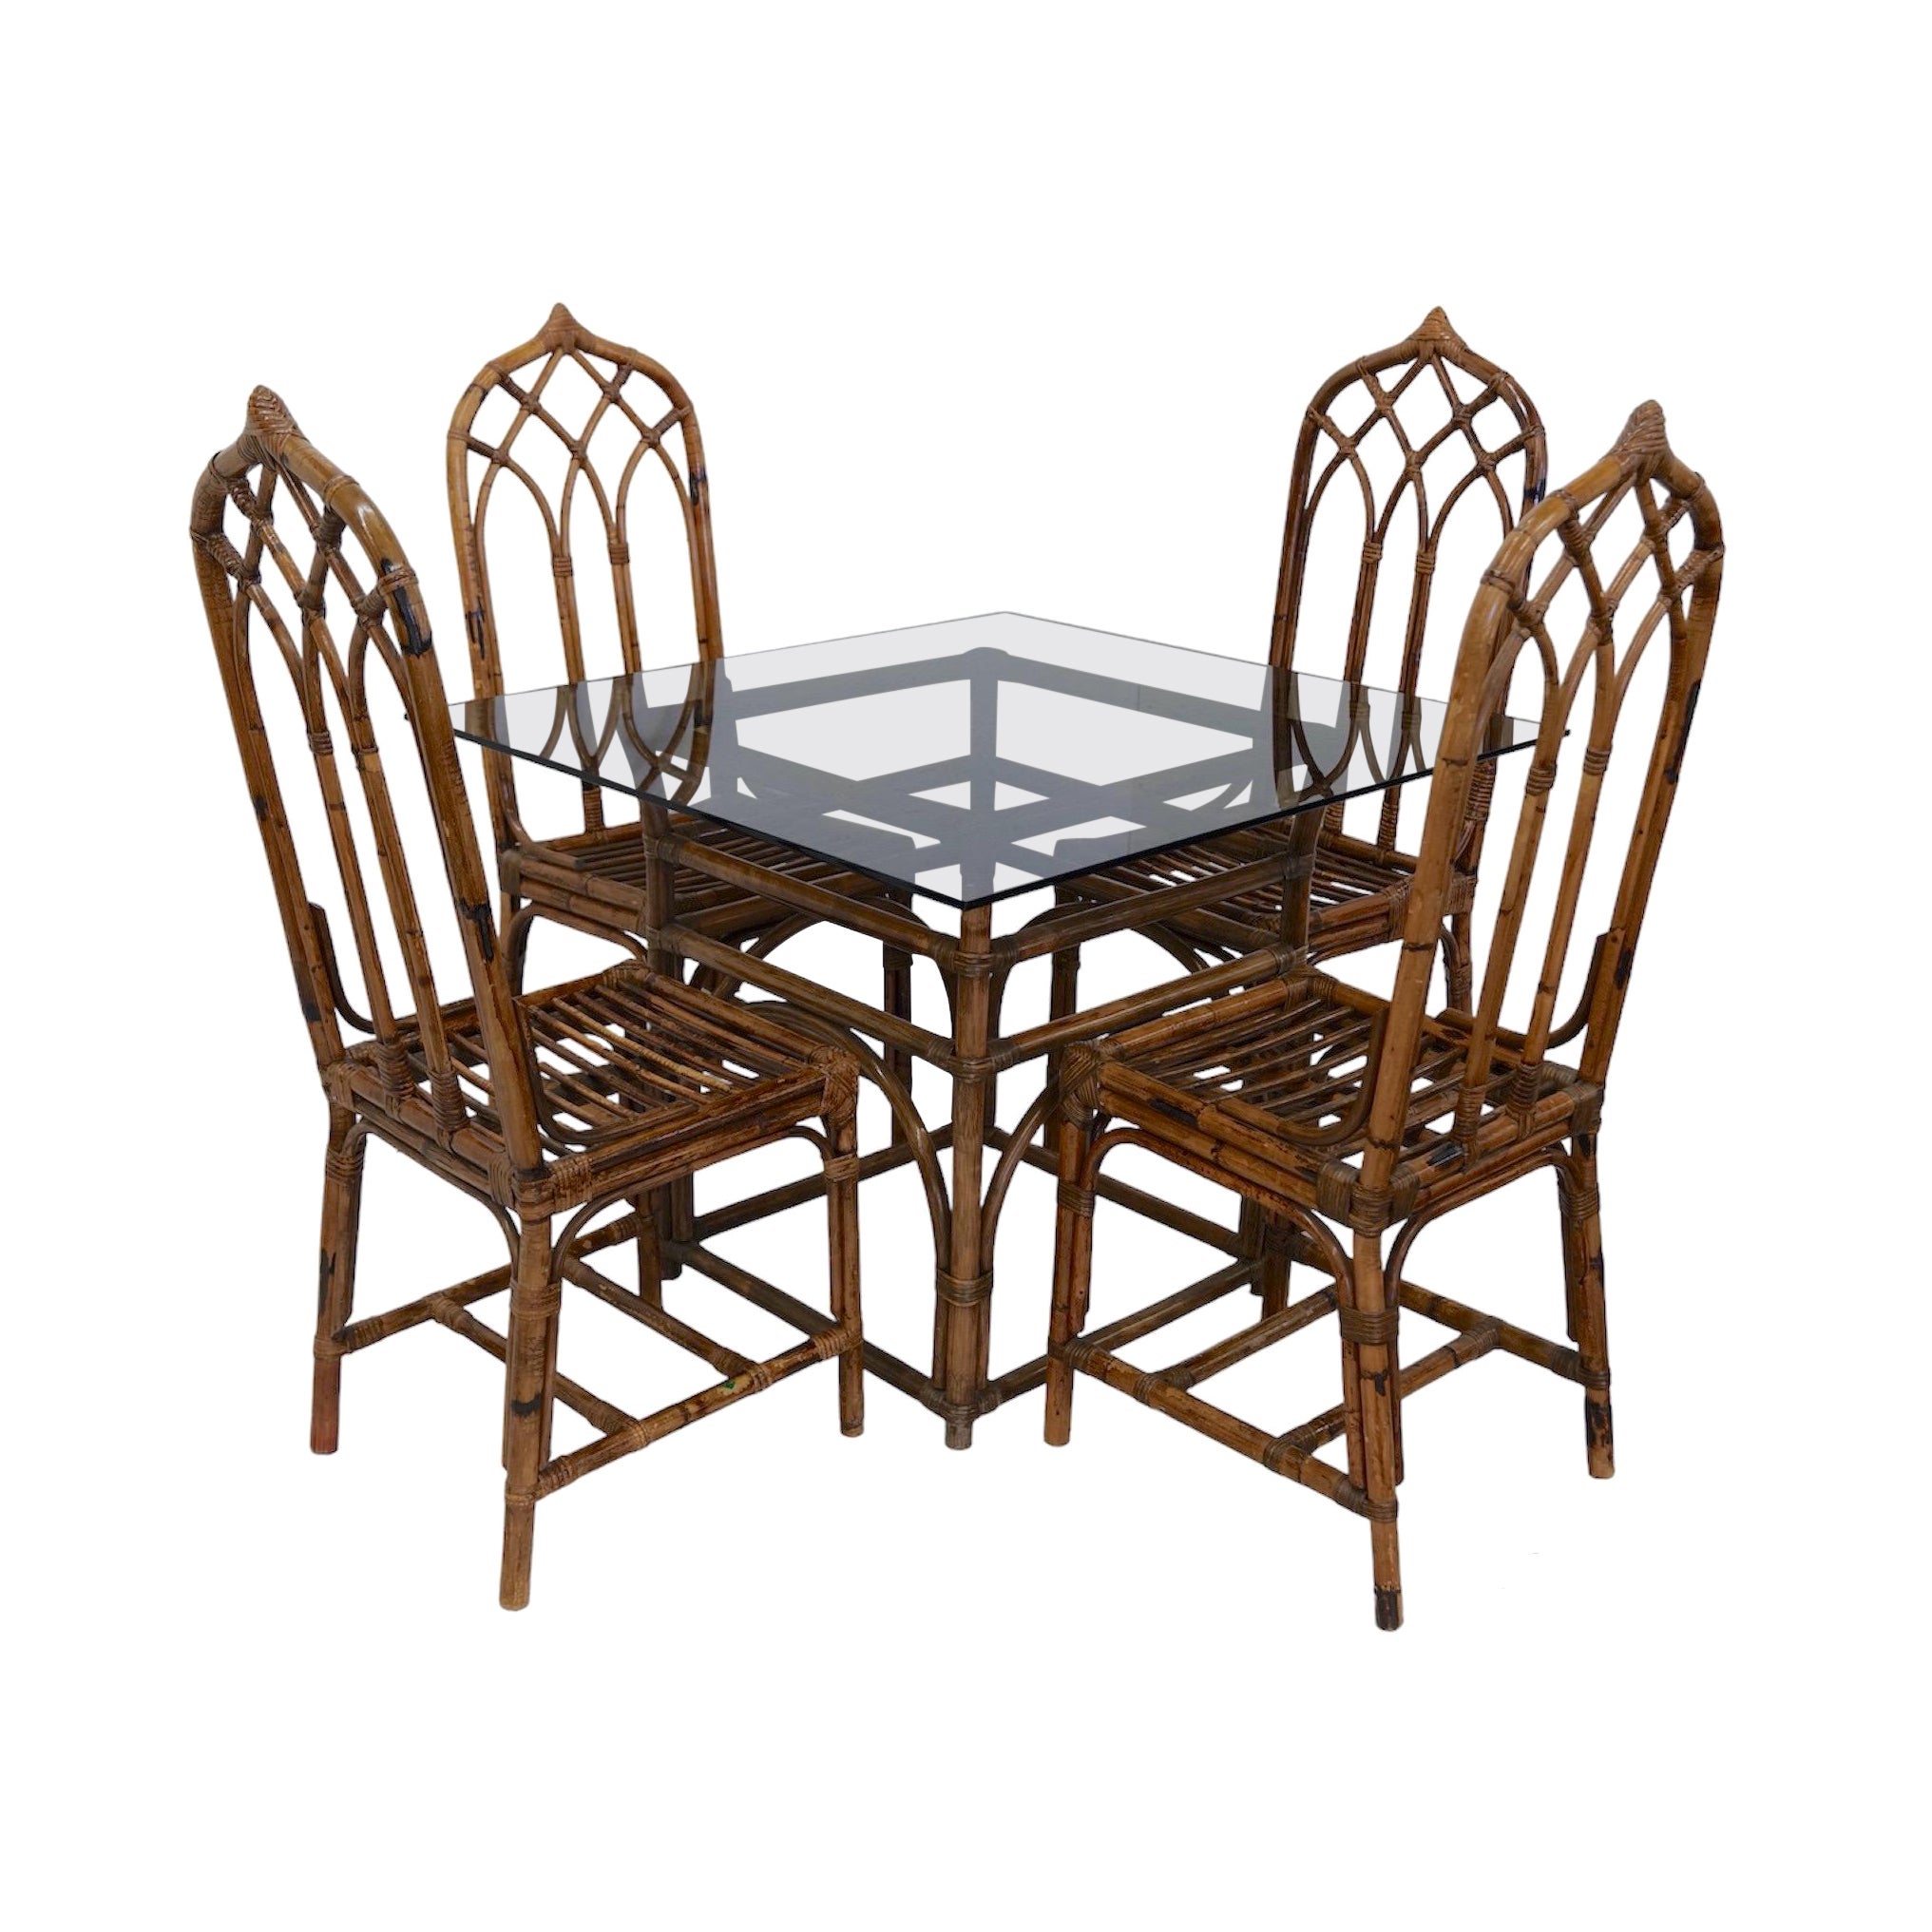 Midcentury Italian Set of 4 Chairs and Table, 1970 For Sale